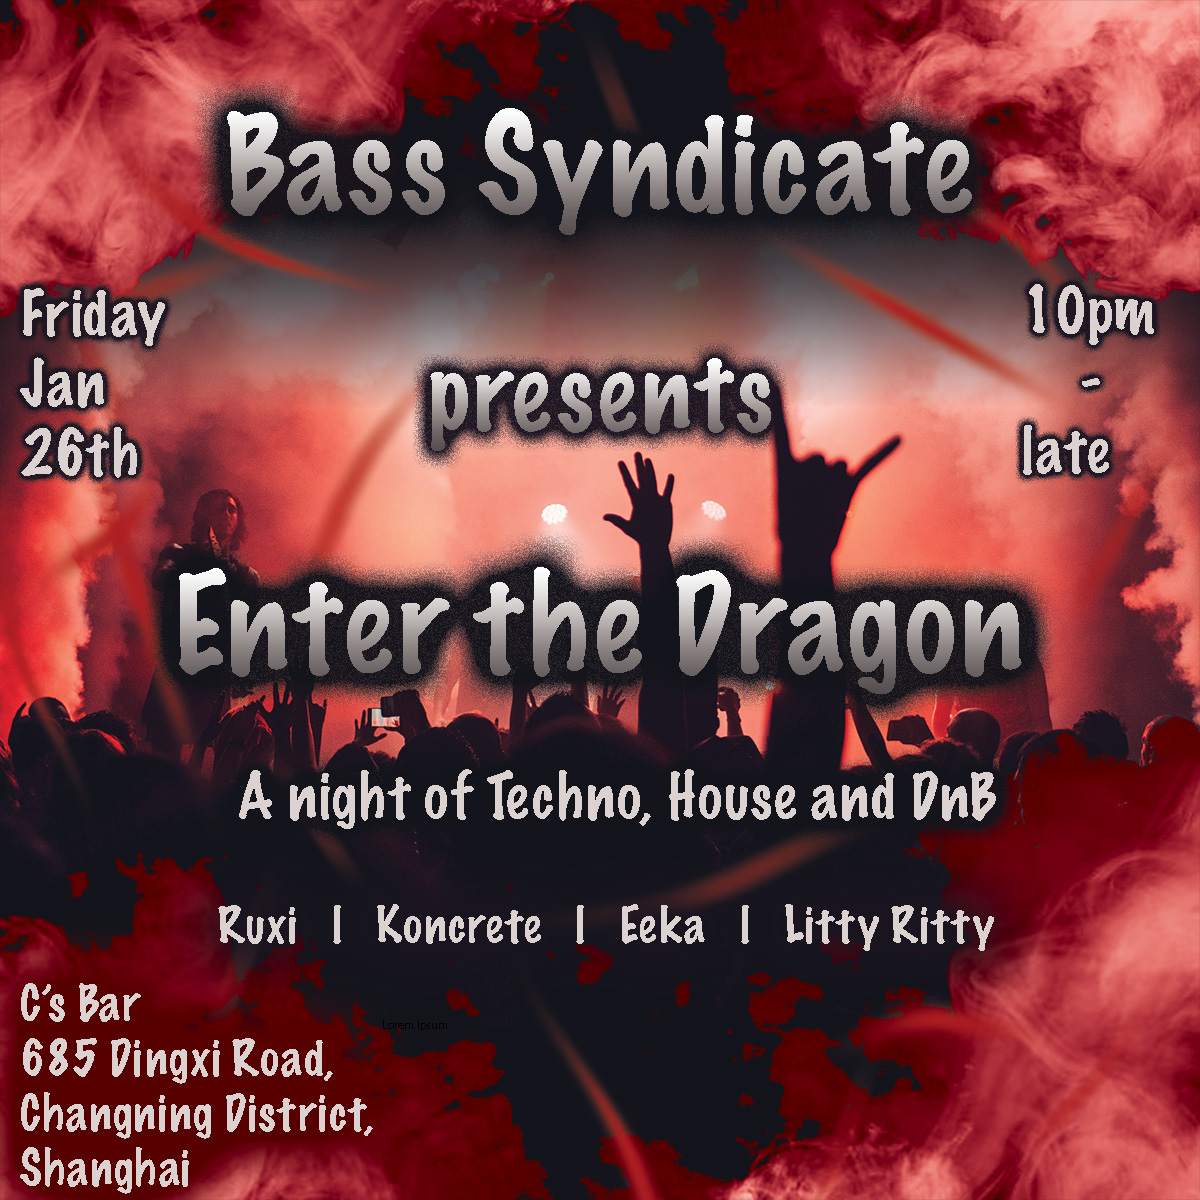 Bass Syndicate presents: Enter the Dragon - フライヤー表